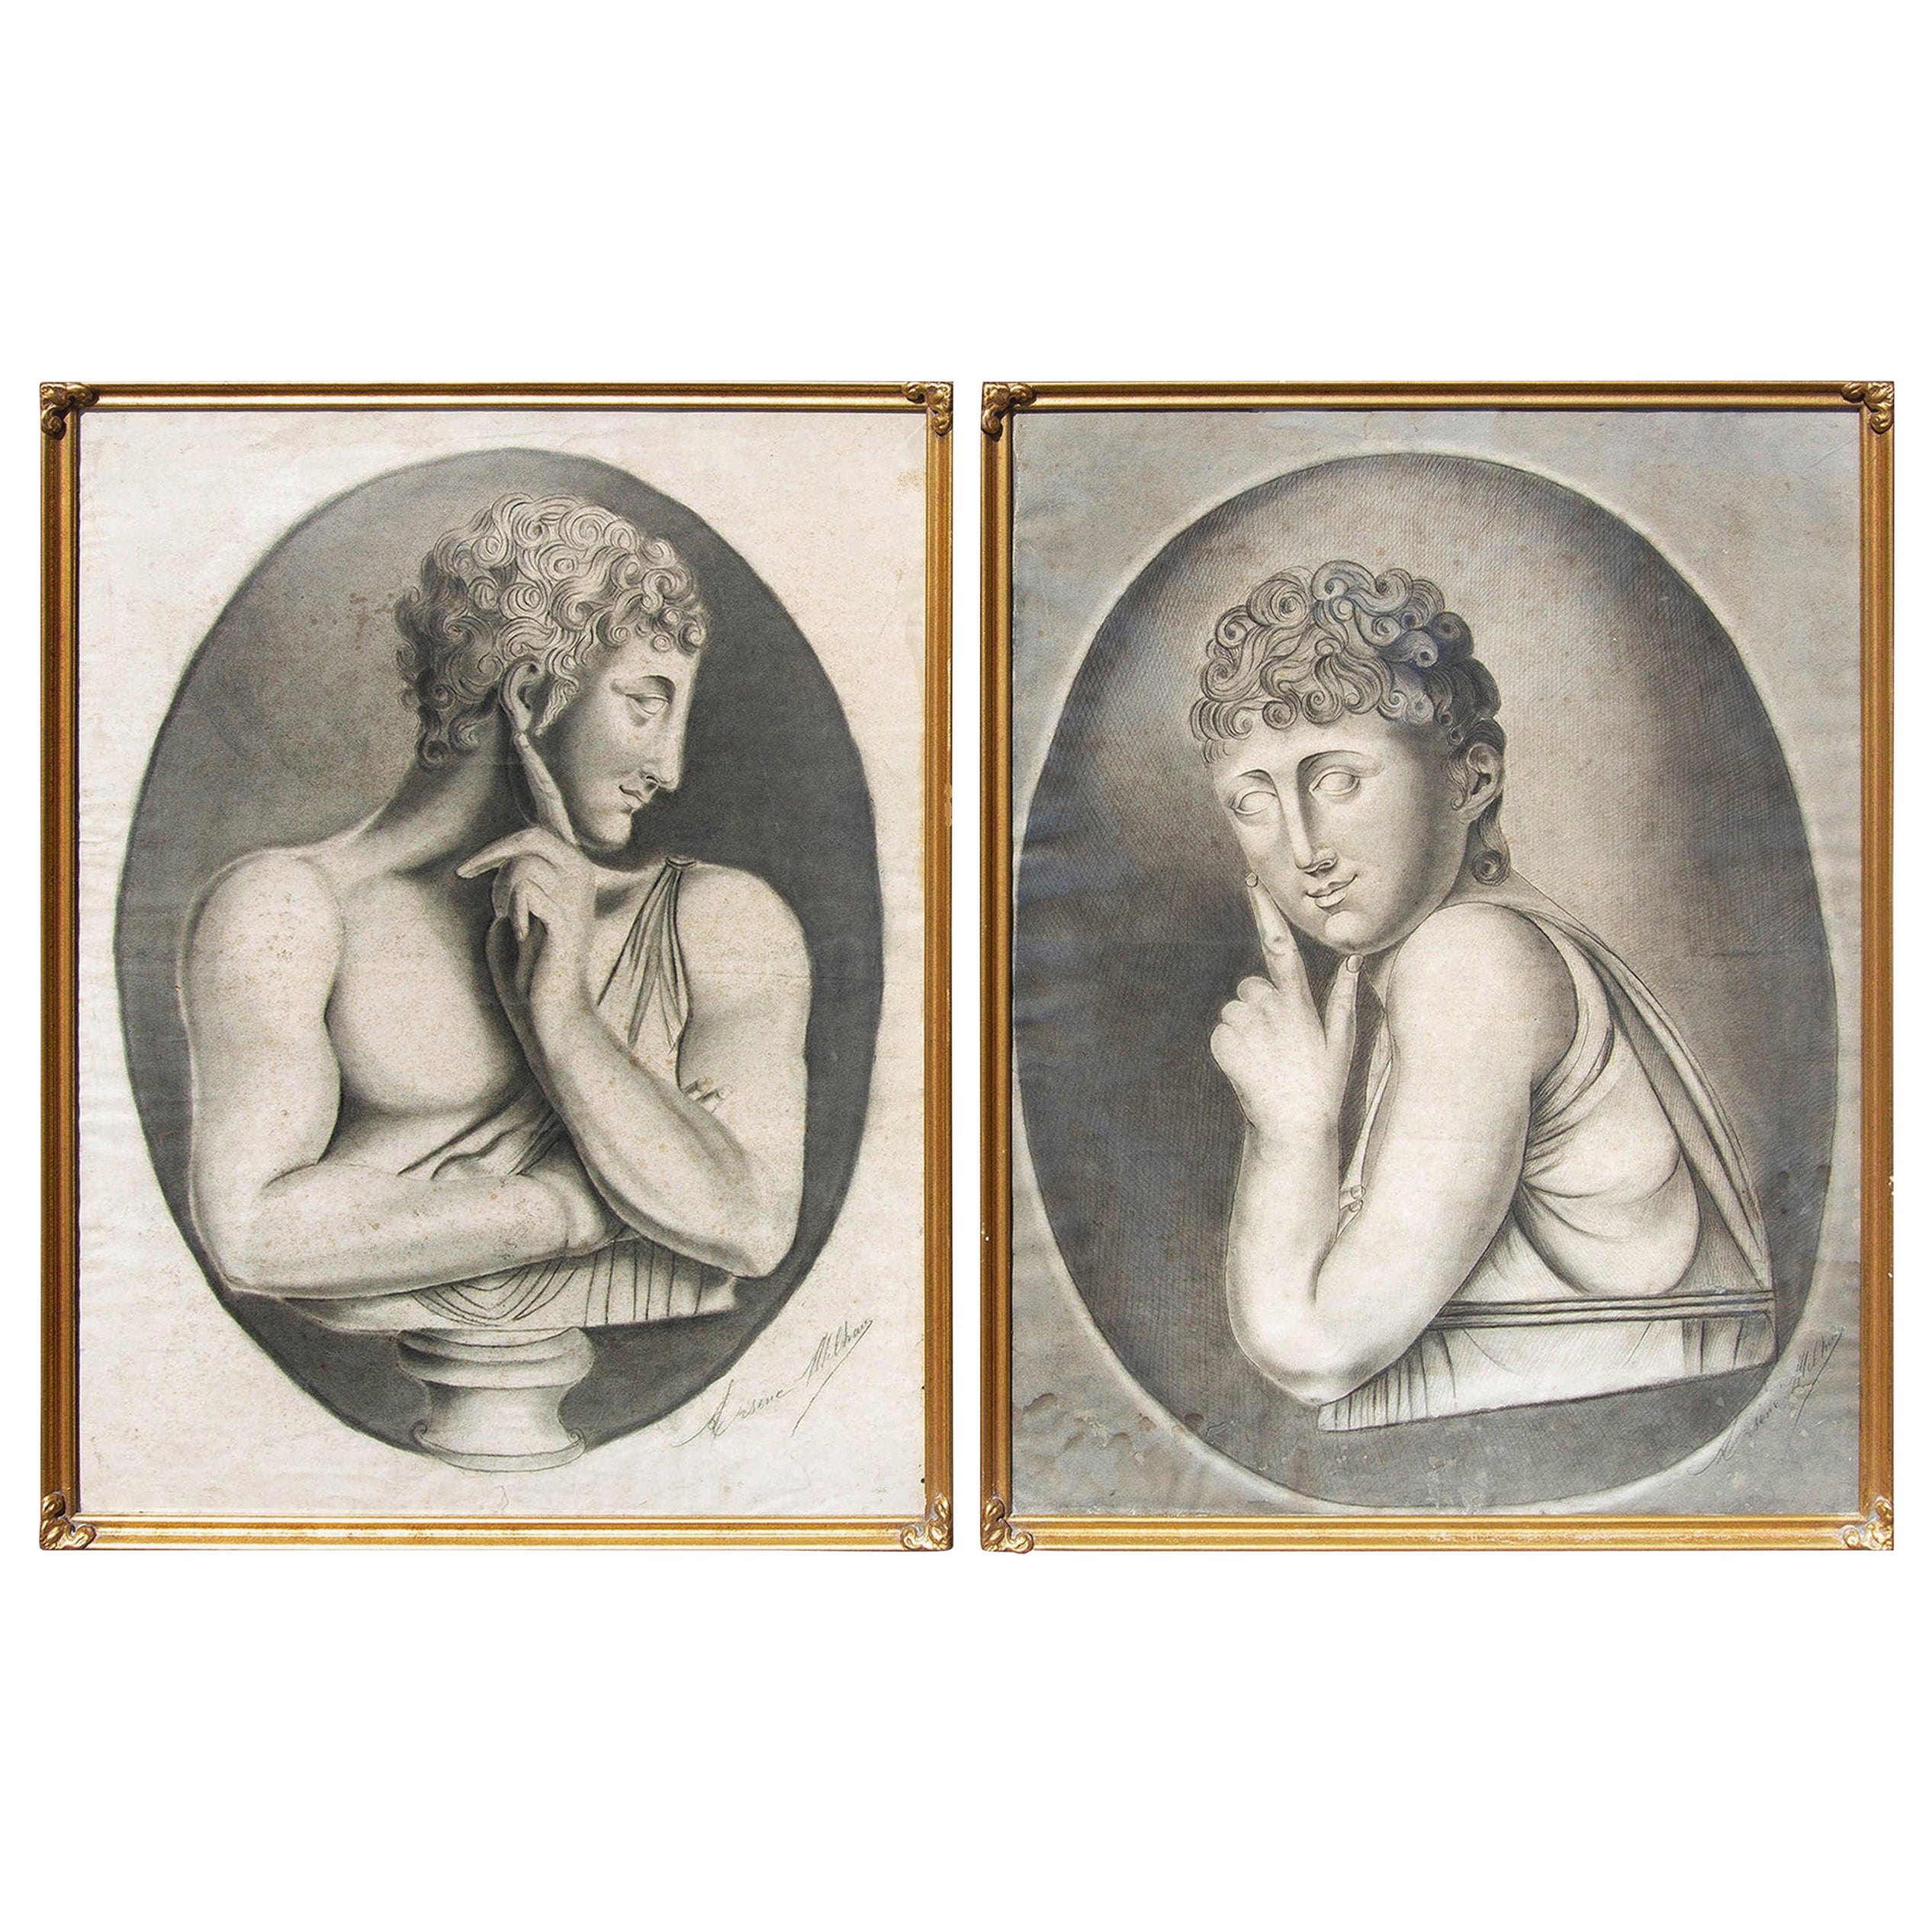 Early 19th Century, French, Salon Portrait Drawings, a Pair